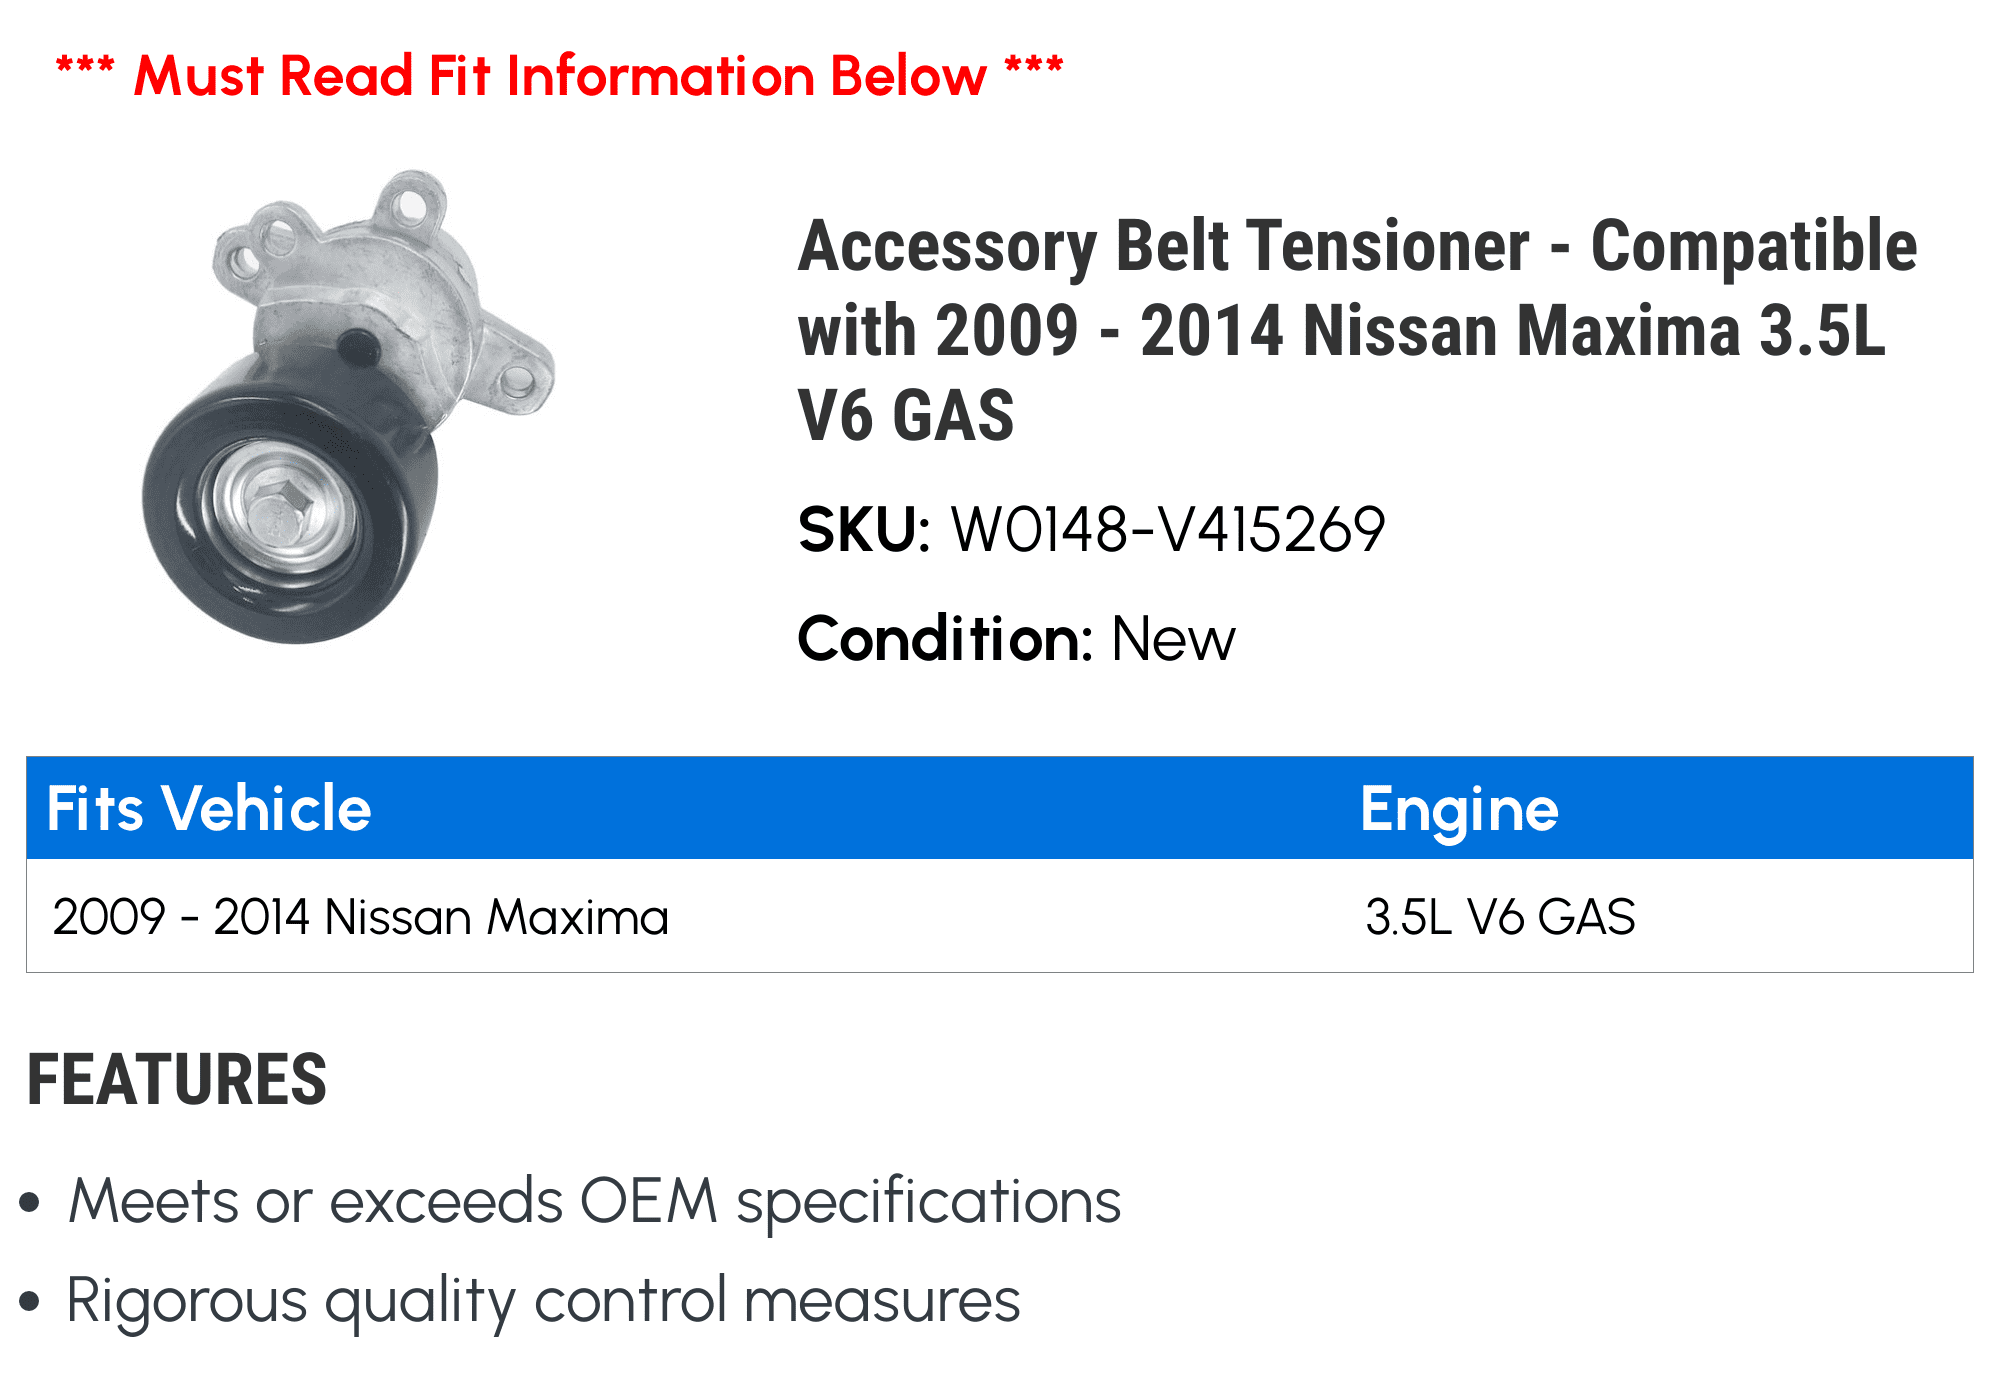 Accessory Belt Tensioner Compatible with 2009-2014 Nissan Maxima 3.5L V6 GAS 